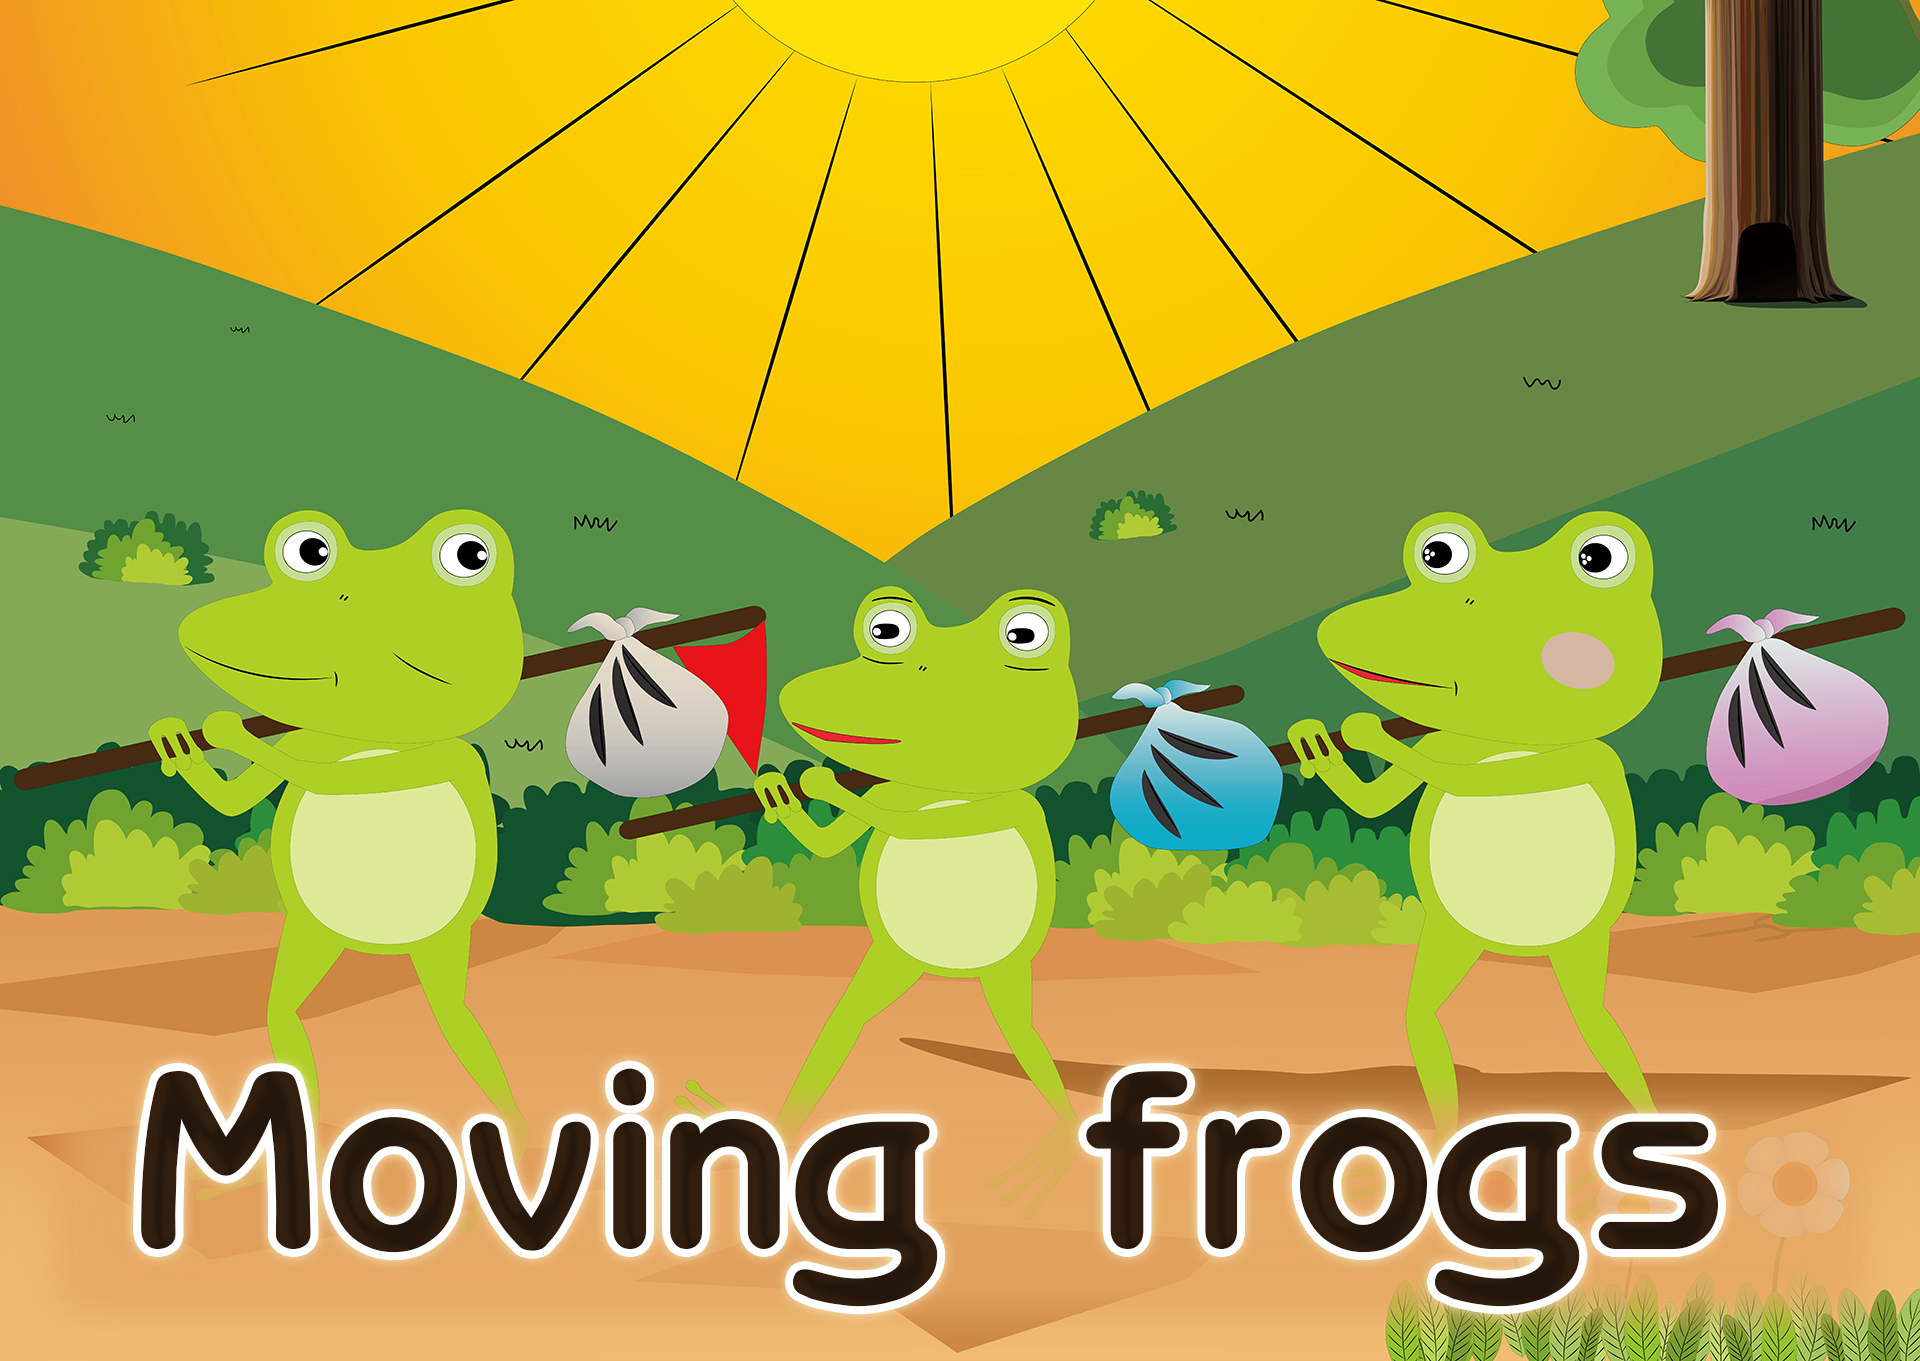 Moving frogs